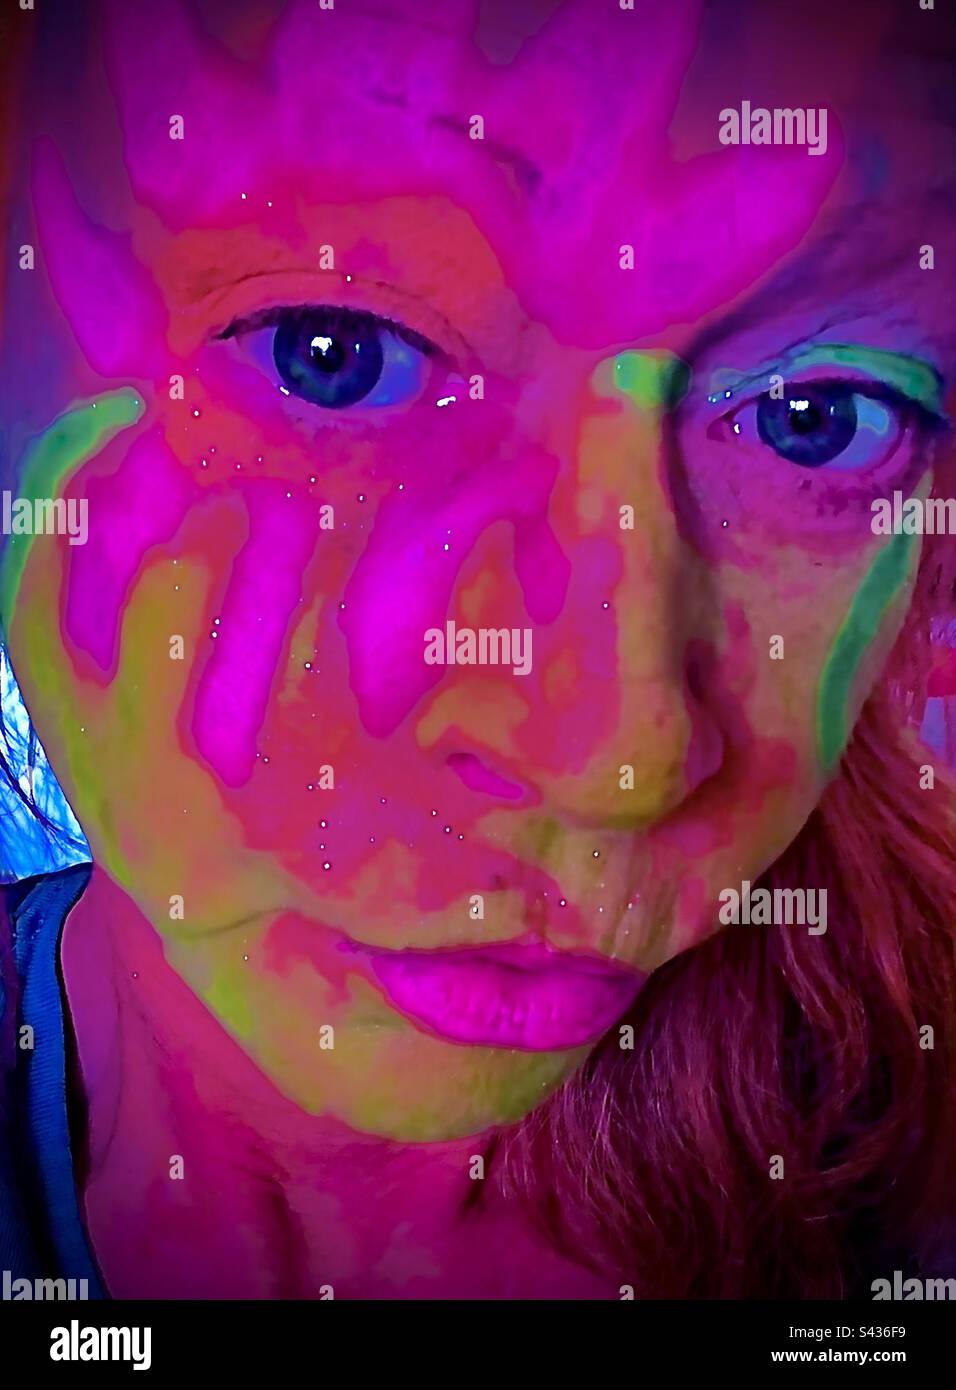 Painted Face. Closeup portrait of woman’s face with bright colored neon face paint. Stock Photo